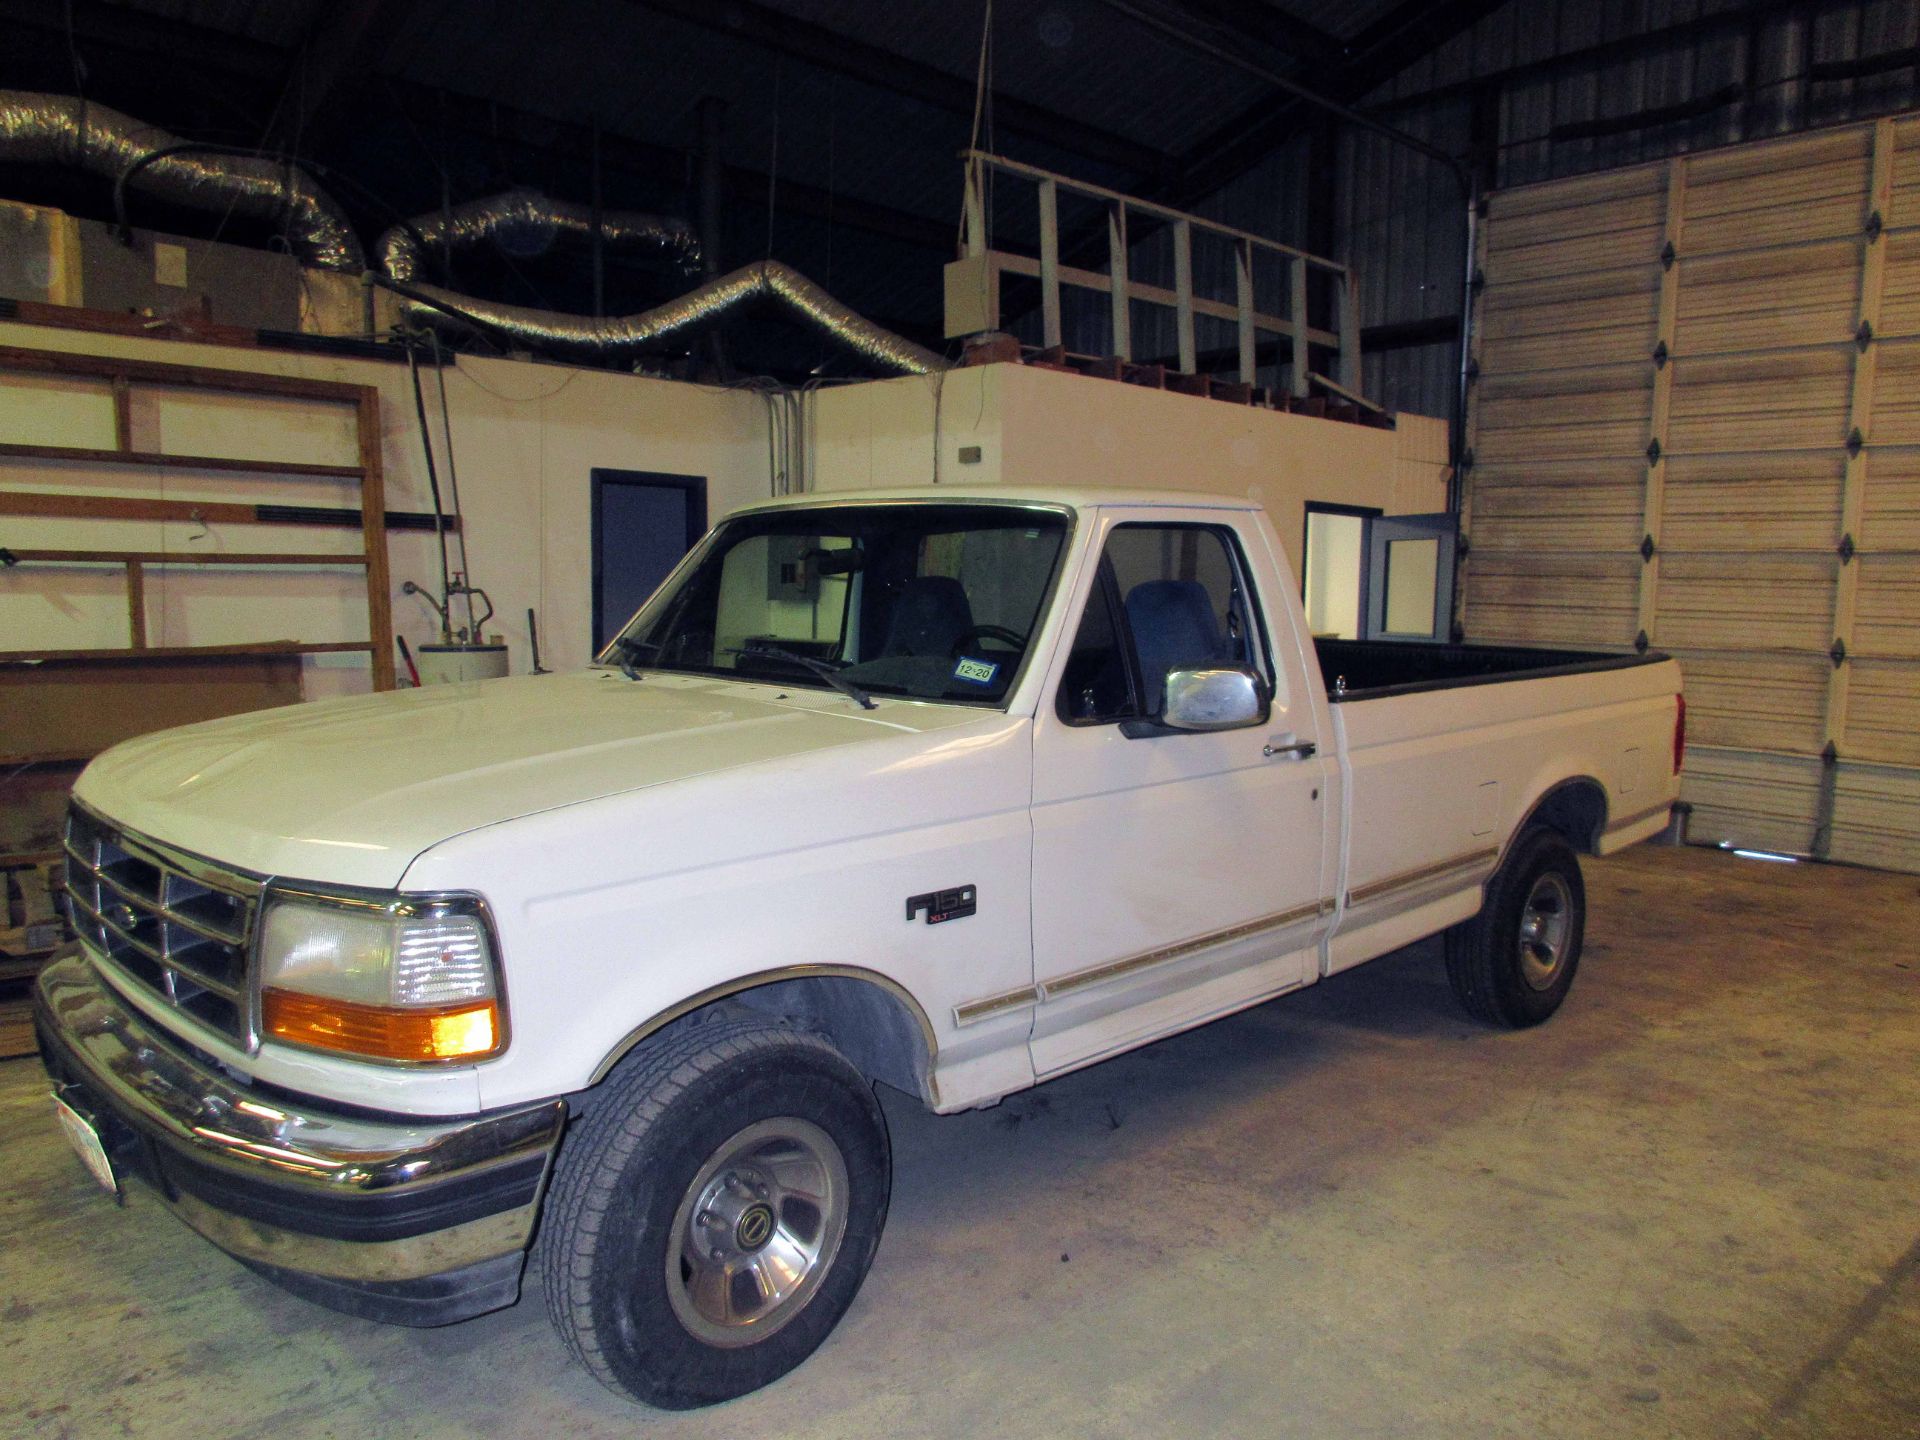 PICKUP TRUCK, 1996 FORD MDL. F150XLT, gasoline engine, auto. trans., Odo: 149,000 miles, Texas - Image 2 of 6